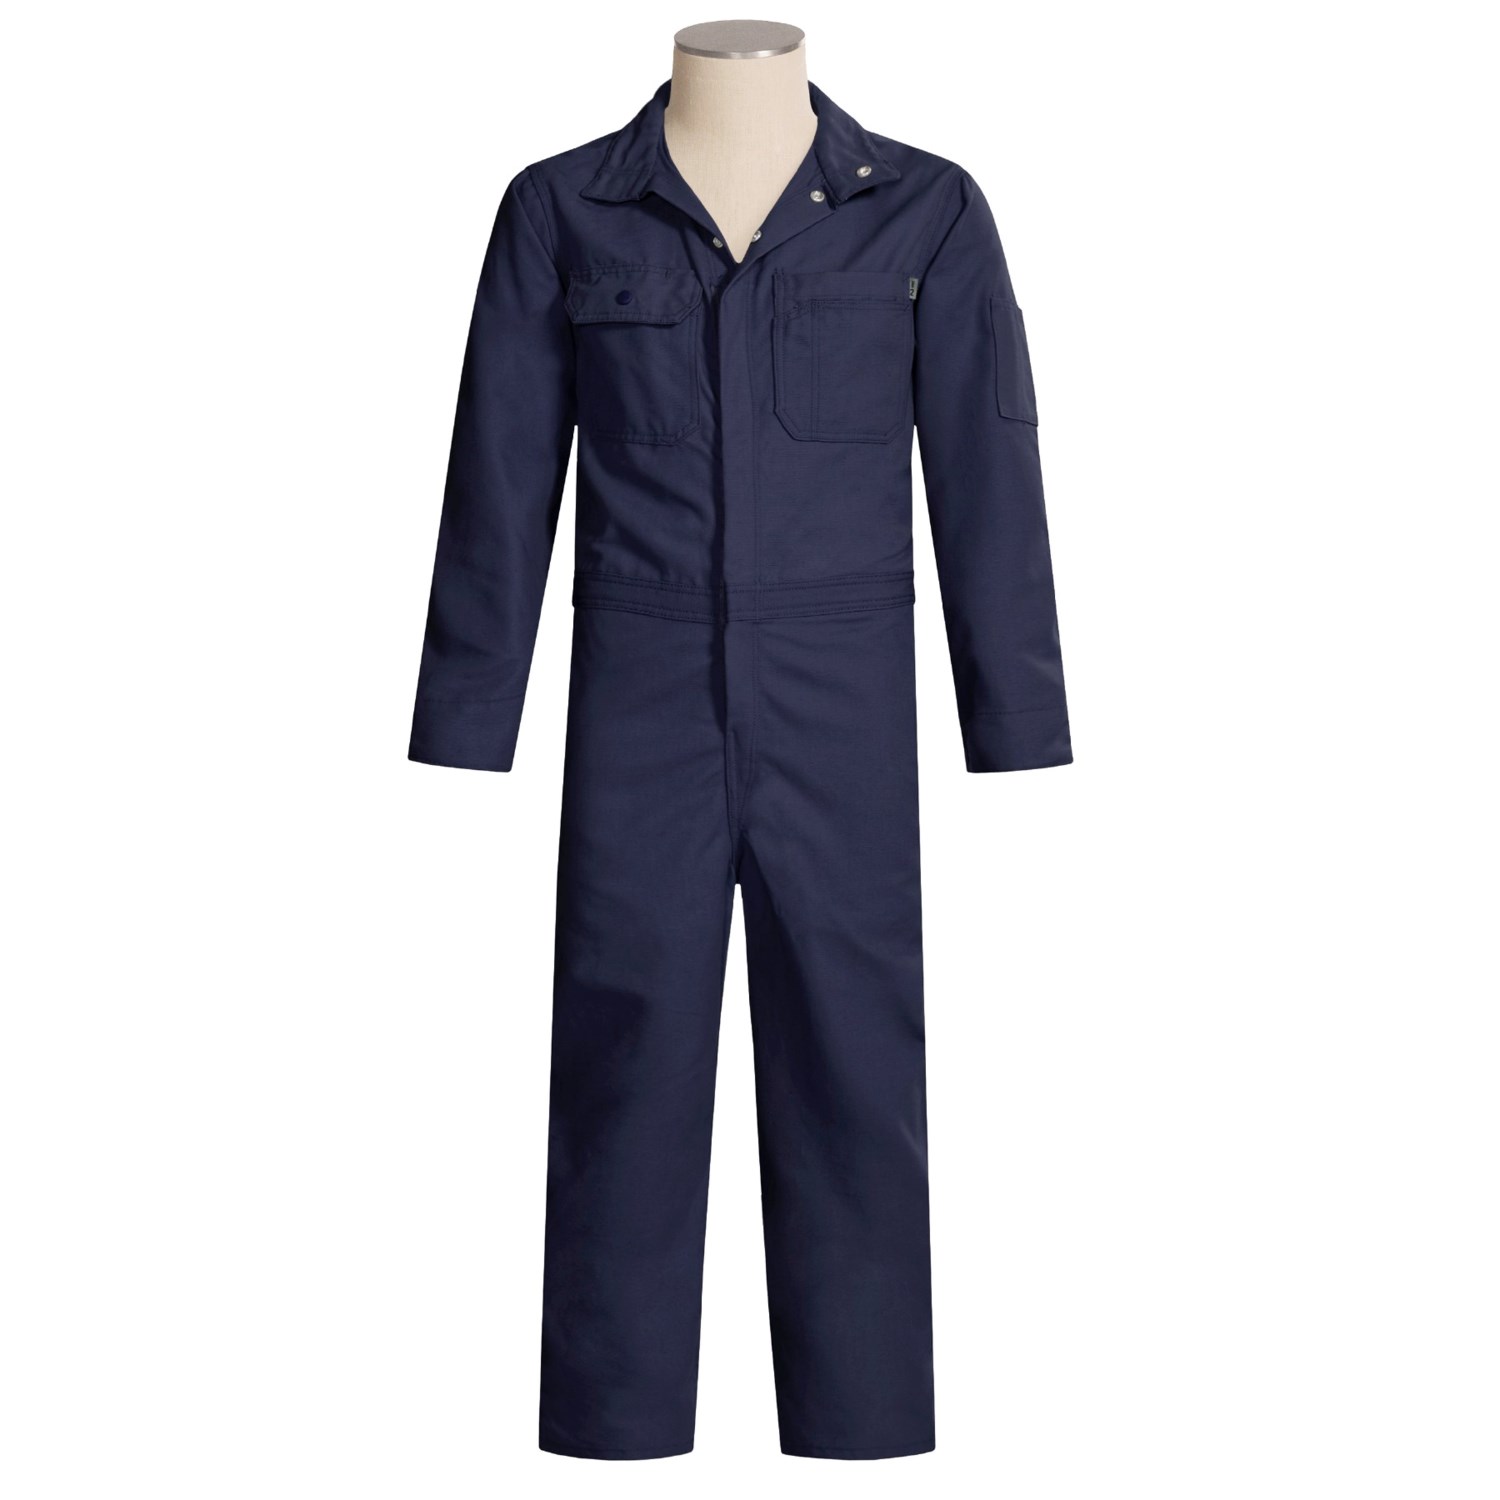 Carhartt Midweight Canvas Coveralls (For Men) 1980C